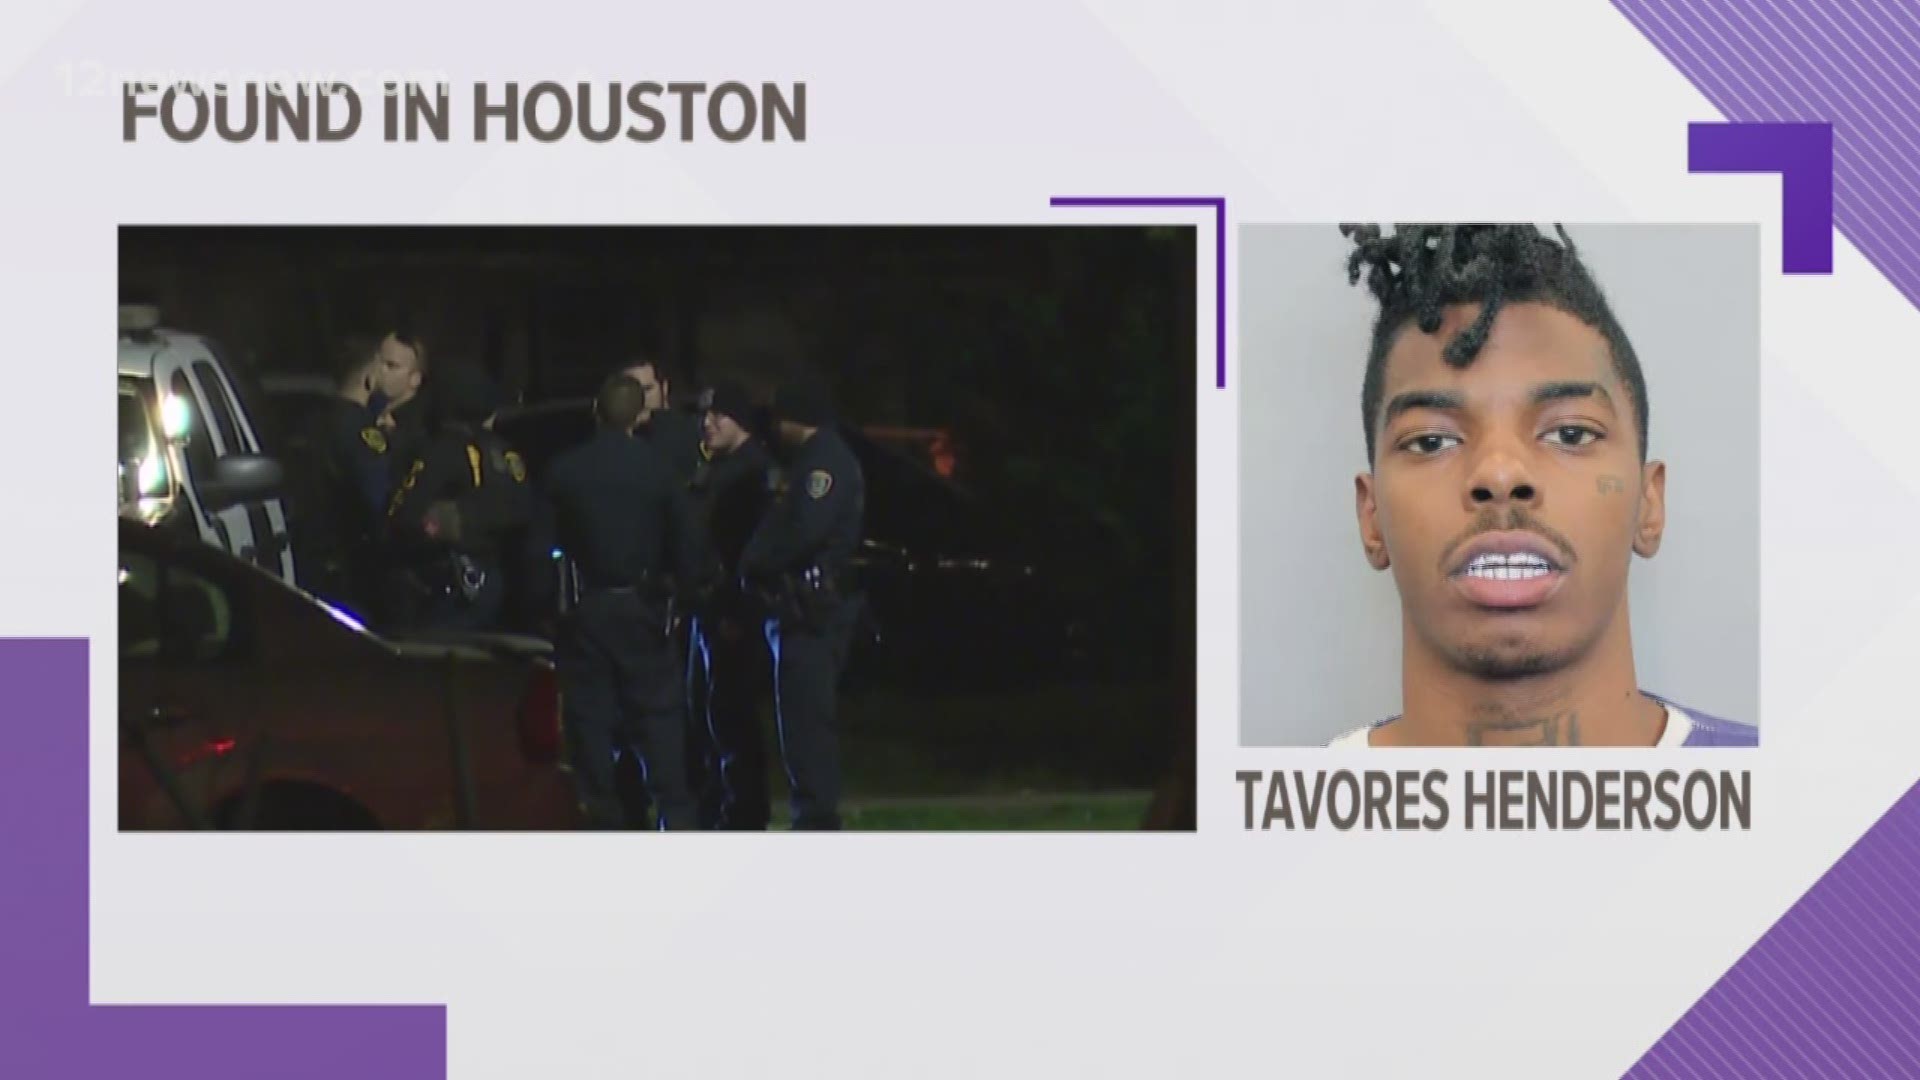 Tavores Henderson was arrested at a home in the 4200 block of Heritage Trail on Thursday afternoon, about two days after the deadly incident.